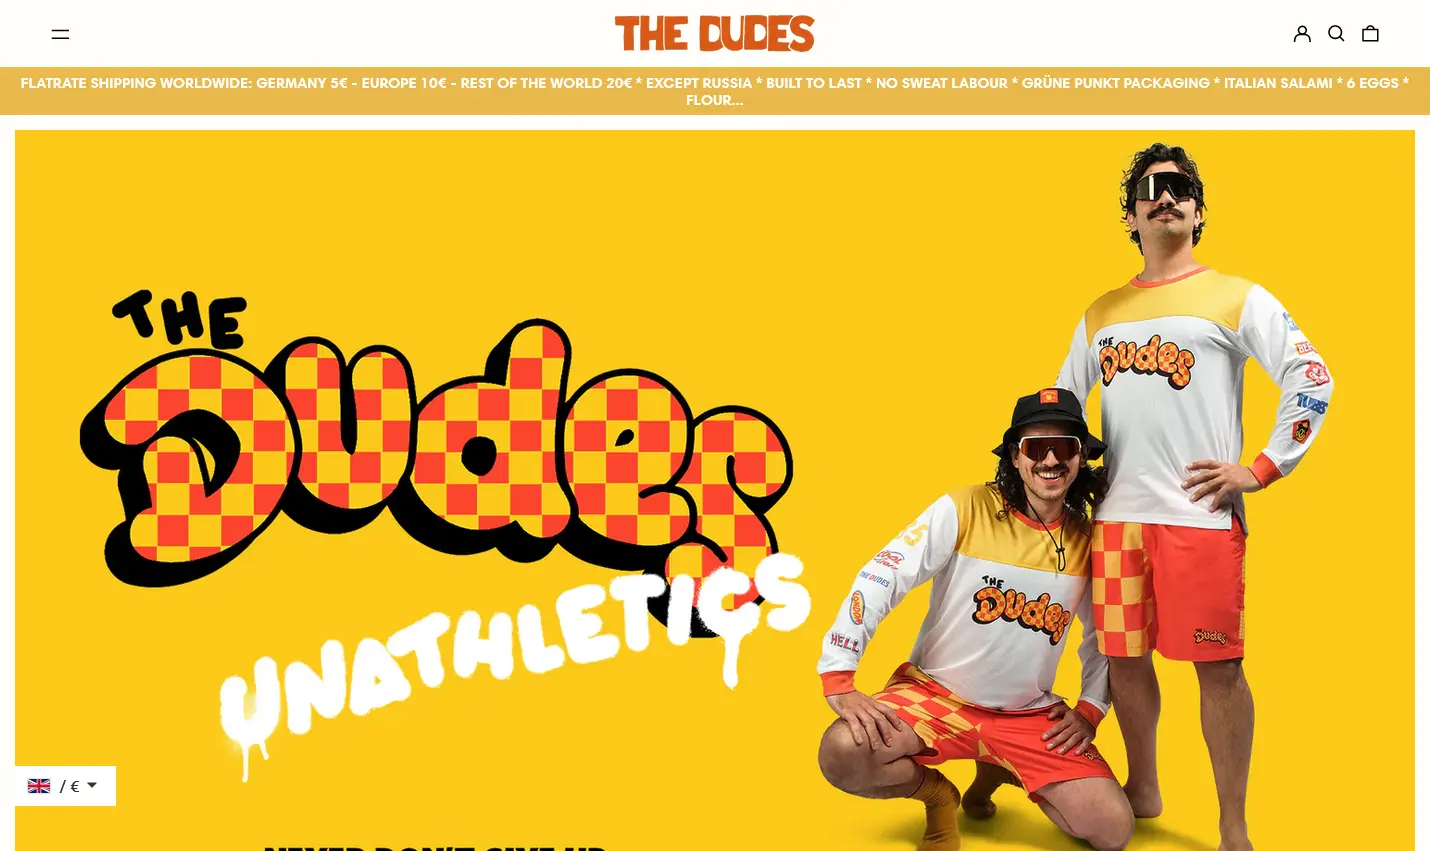 Dudes webdesign by 3oneseven